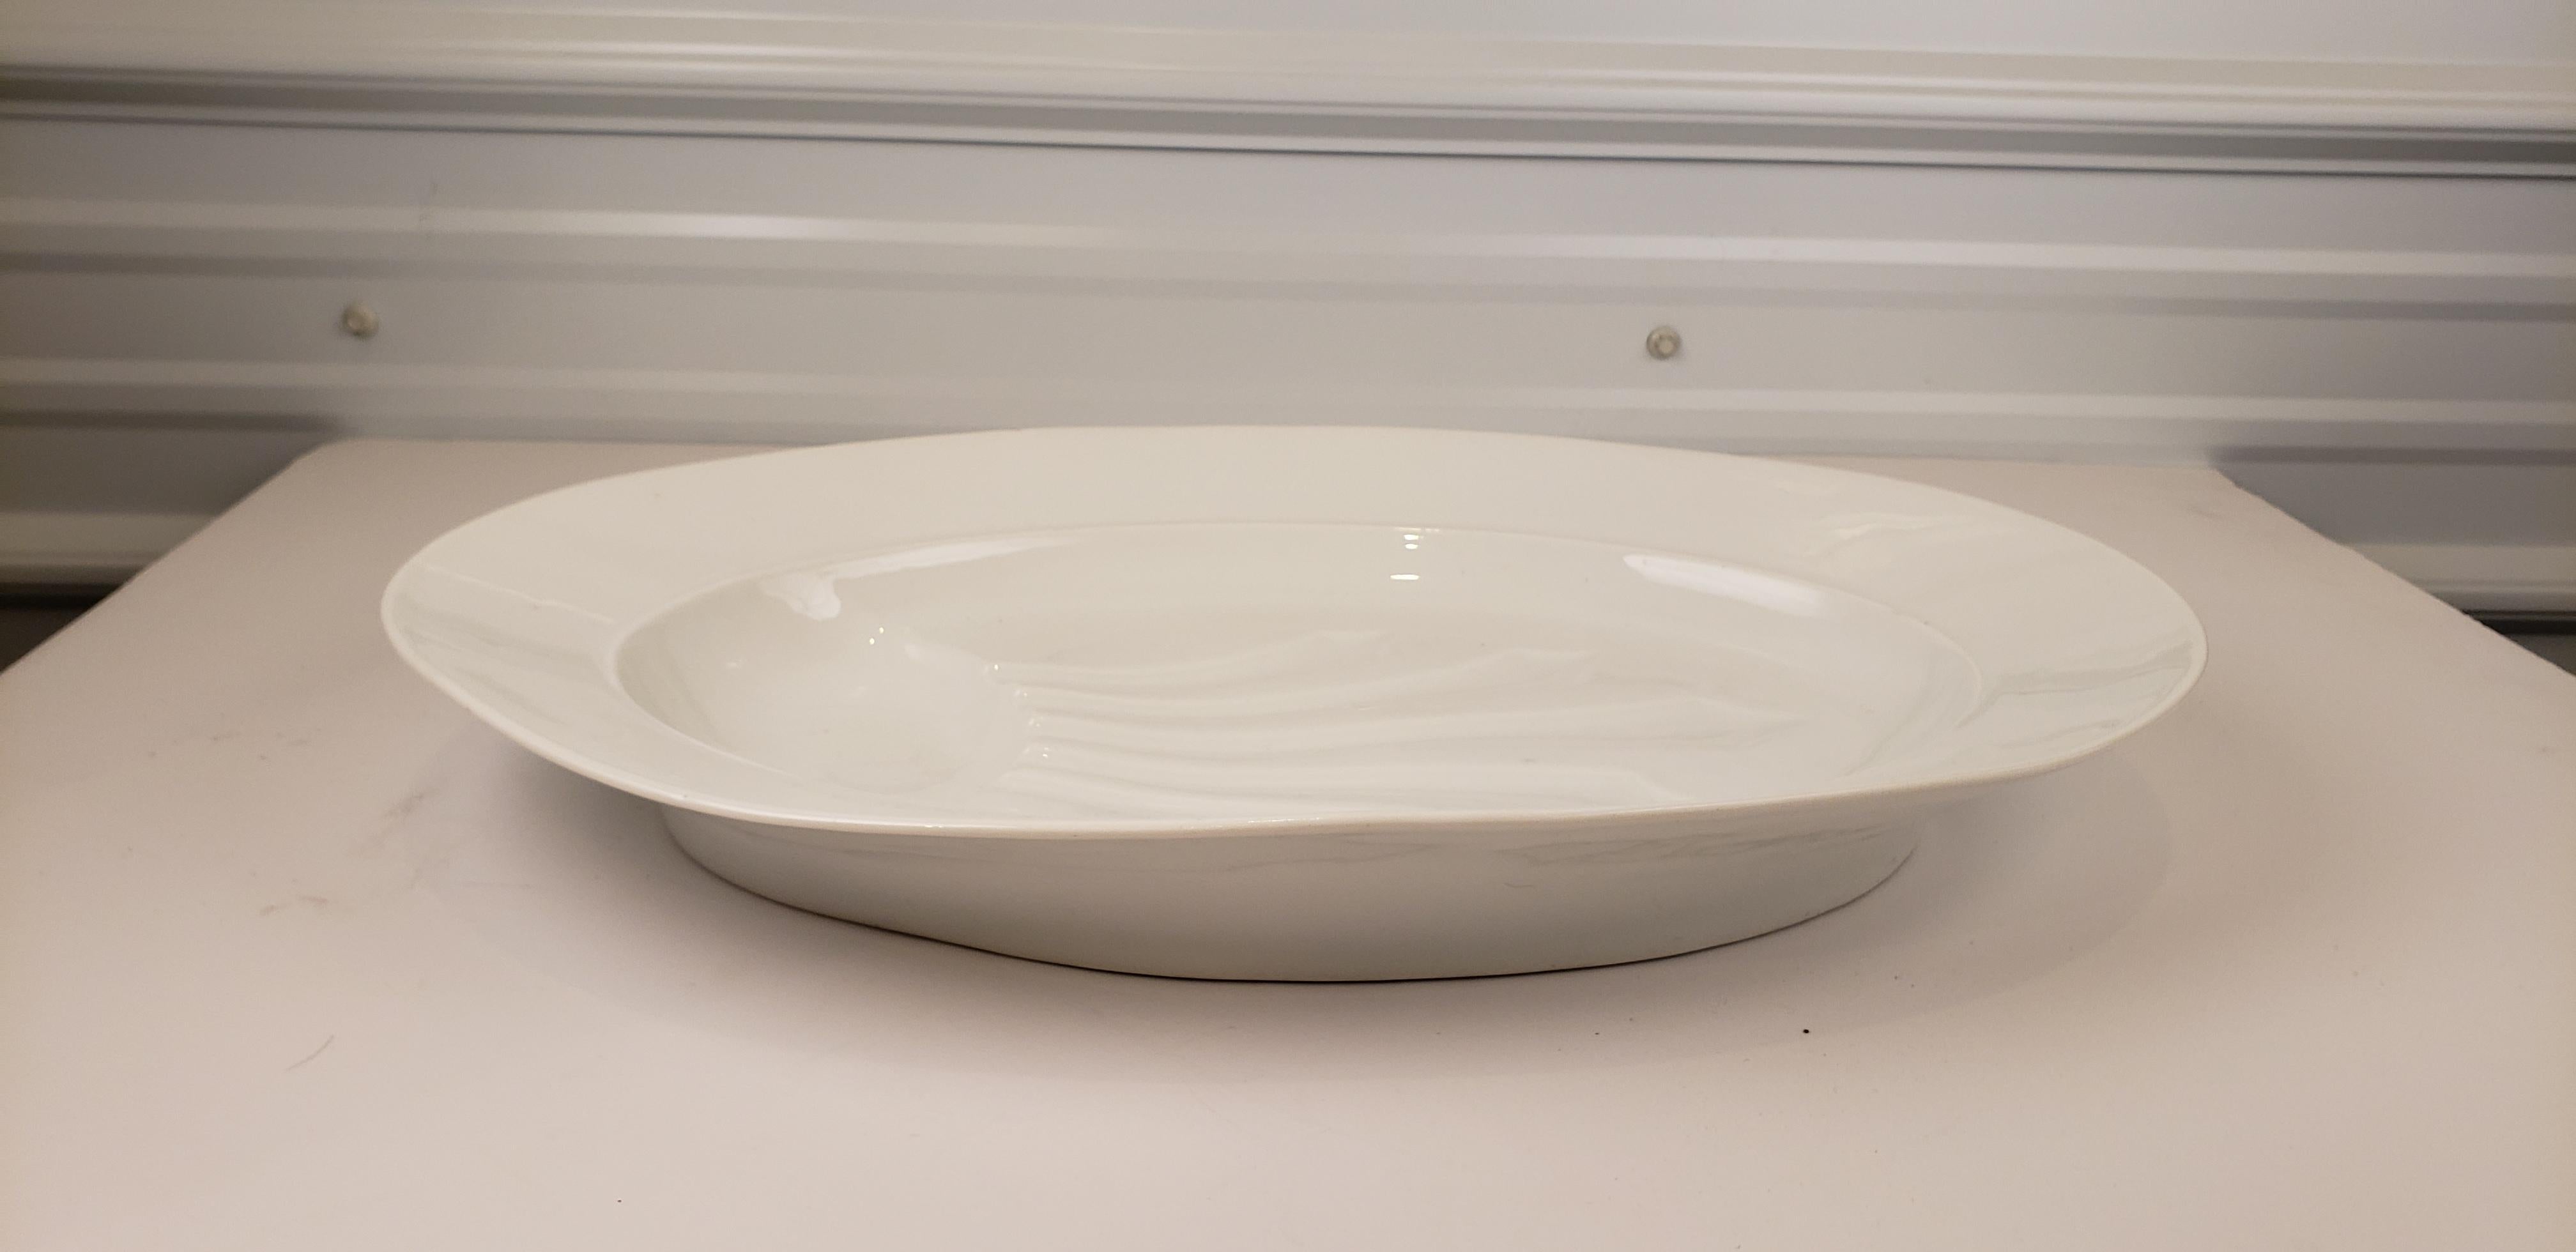 Antique French White Napoleon III Porcelain Carving Platter For Sale 3